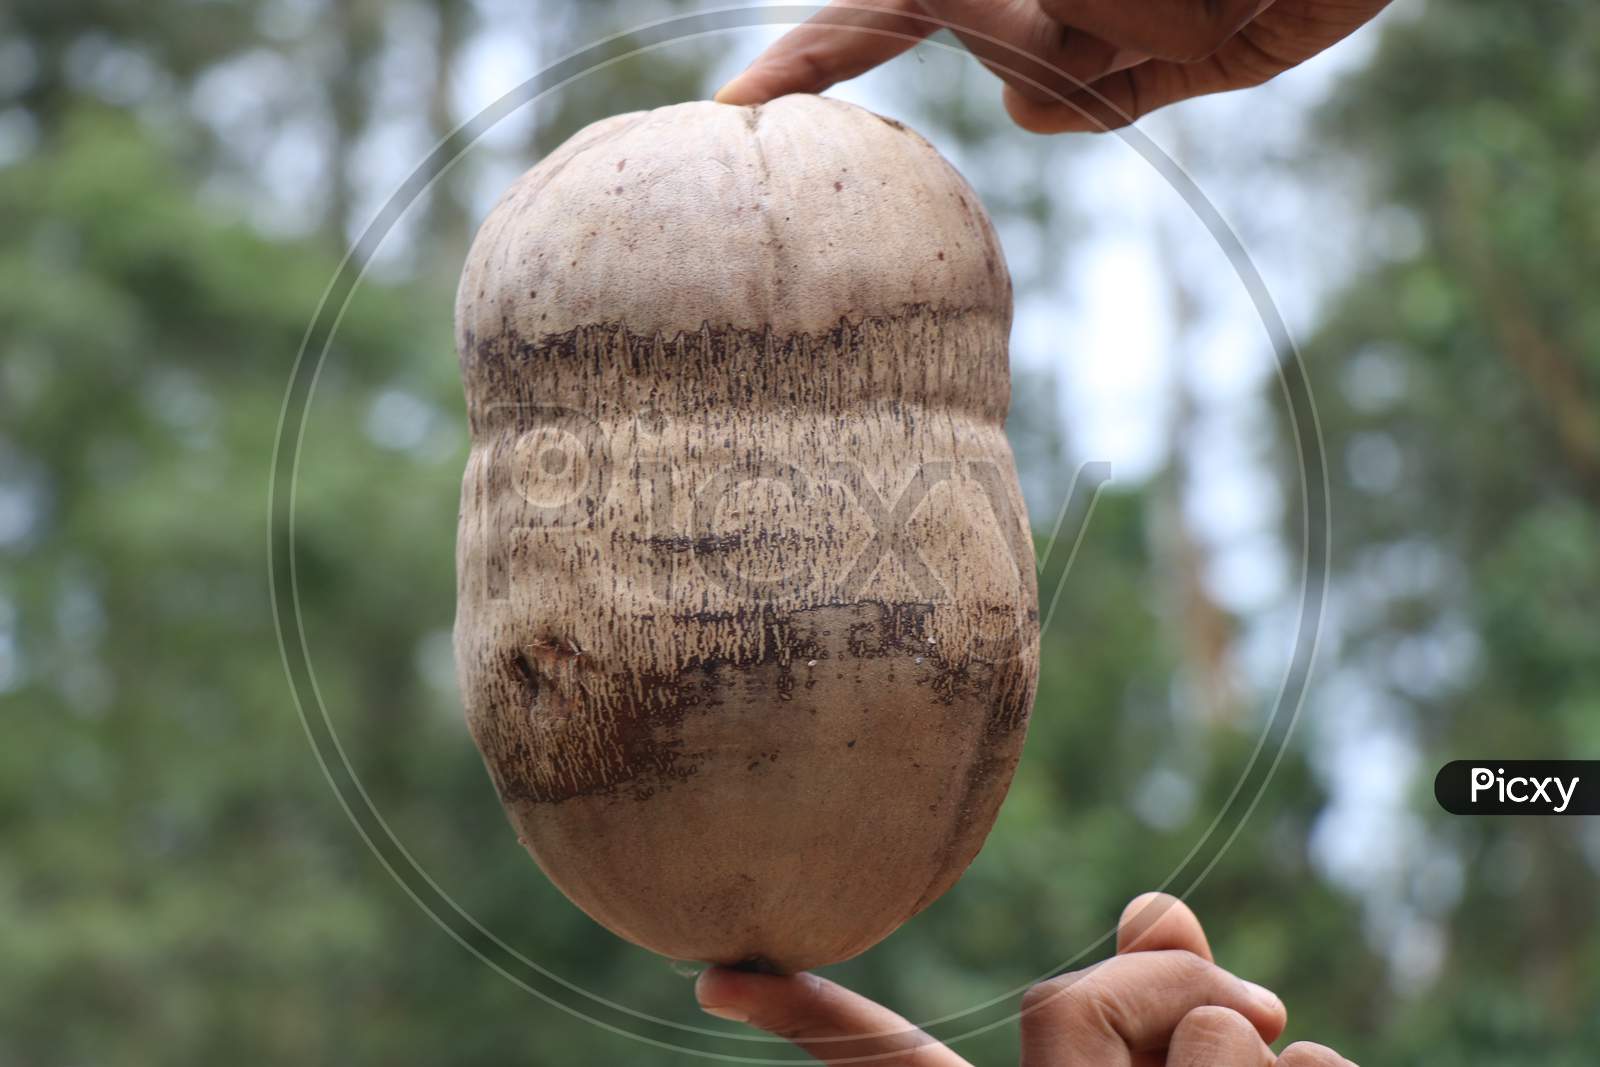 Dry Coconut Which Is Vegetable Ingredient With Husk And Completely Ripe Held In Hand